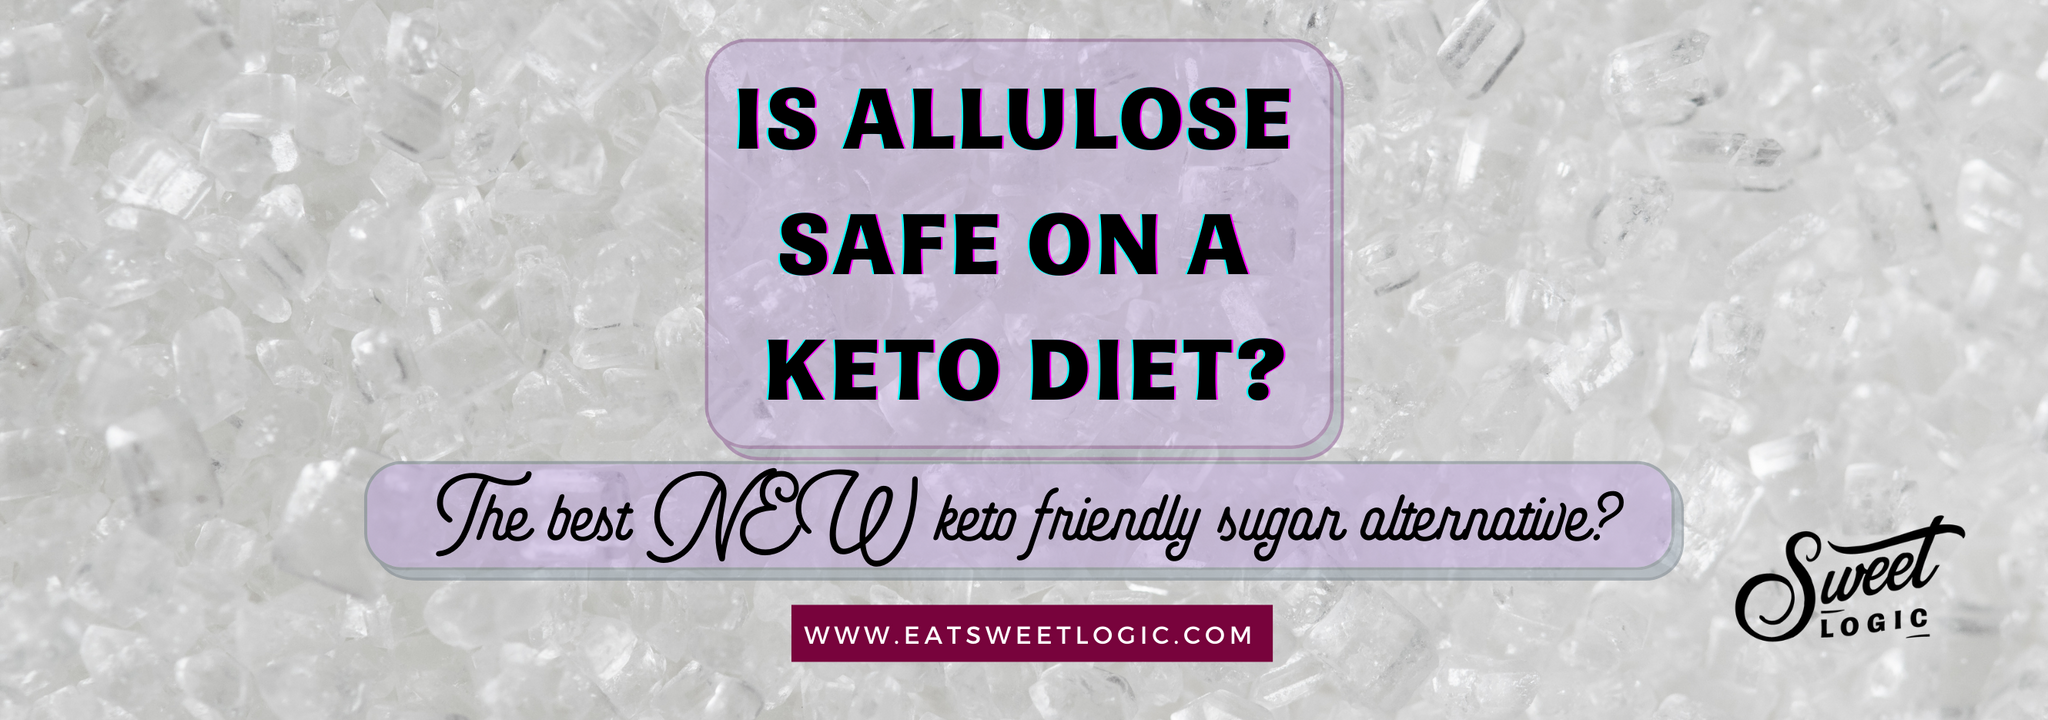 Is Allulose Safe on a Keto Diet?